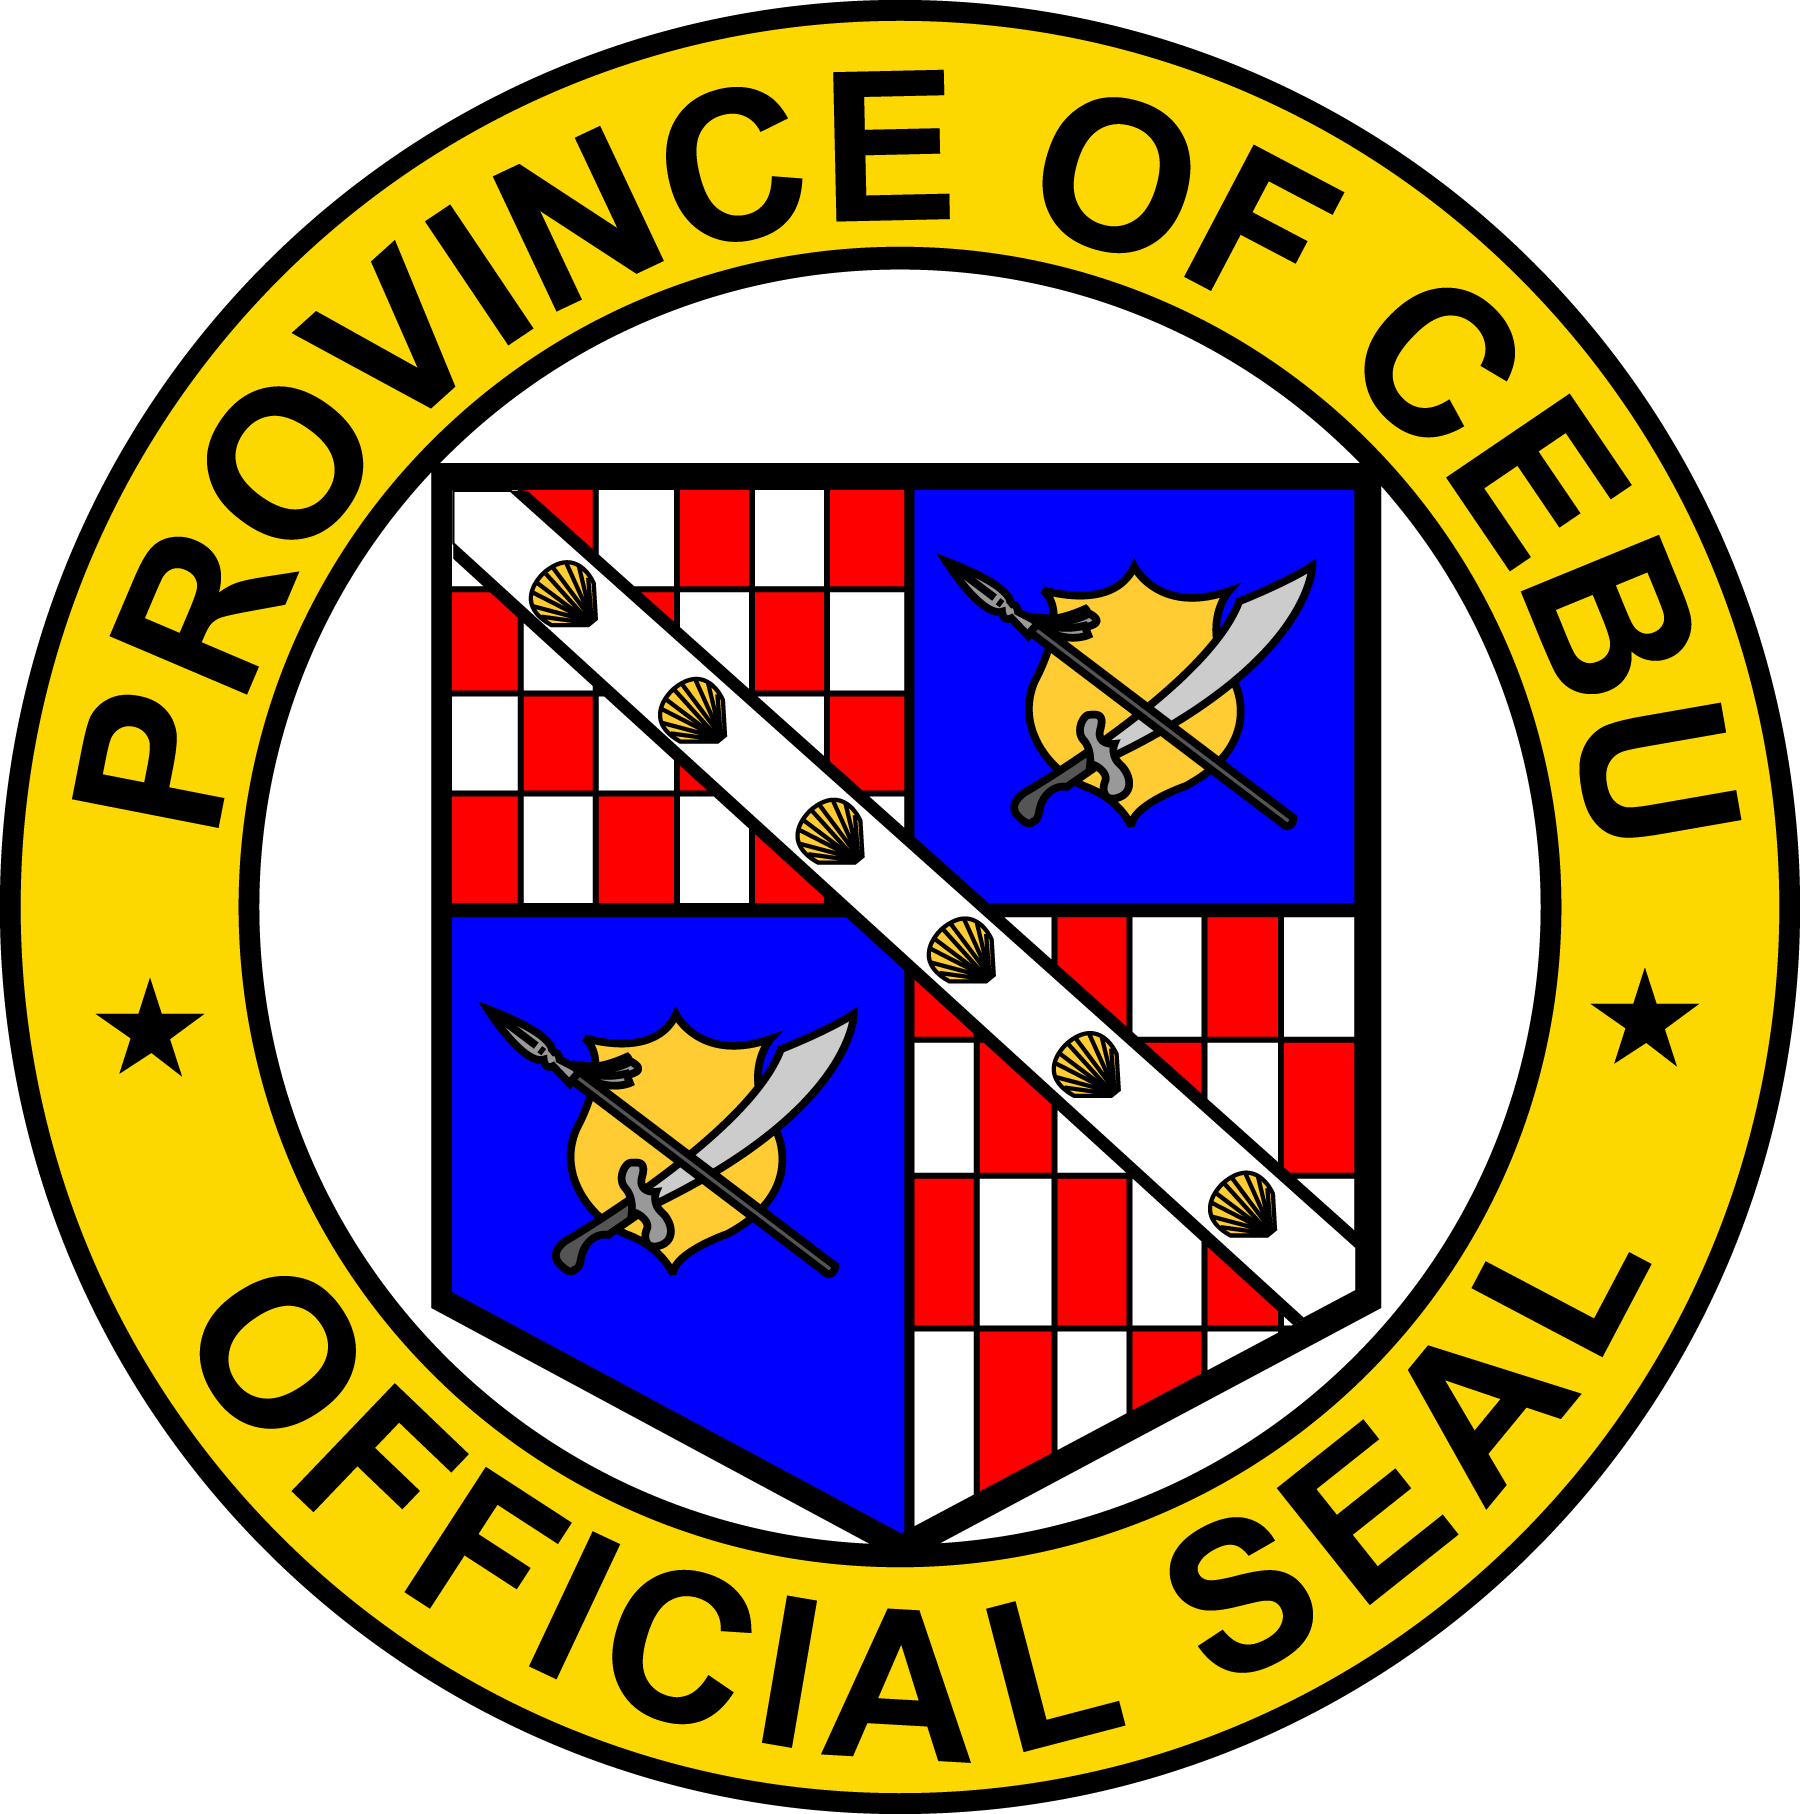 Province of Cebu Official Seal